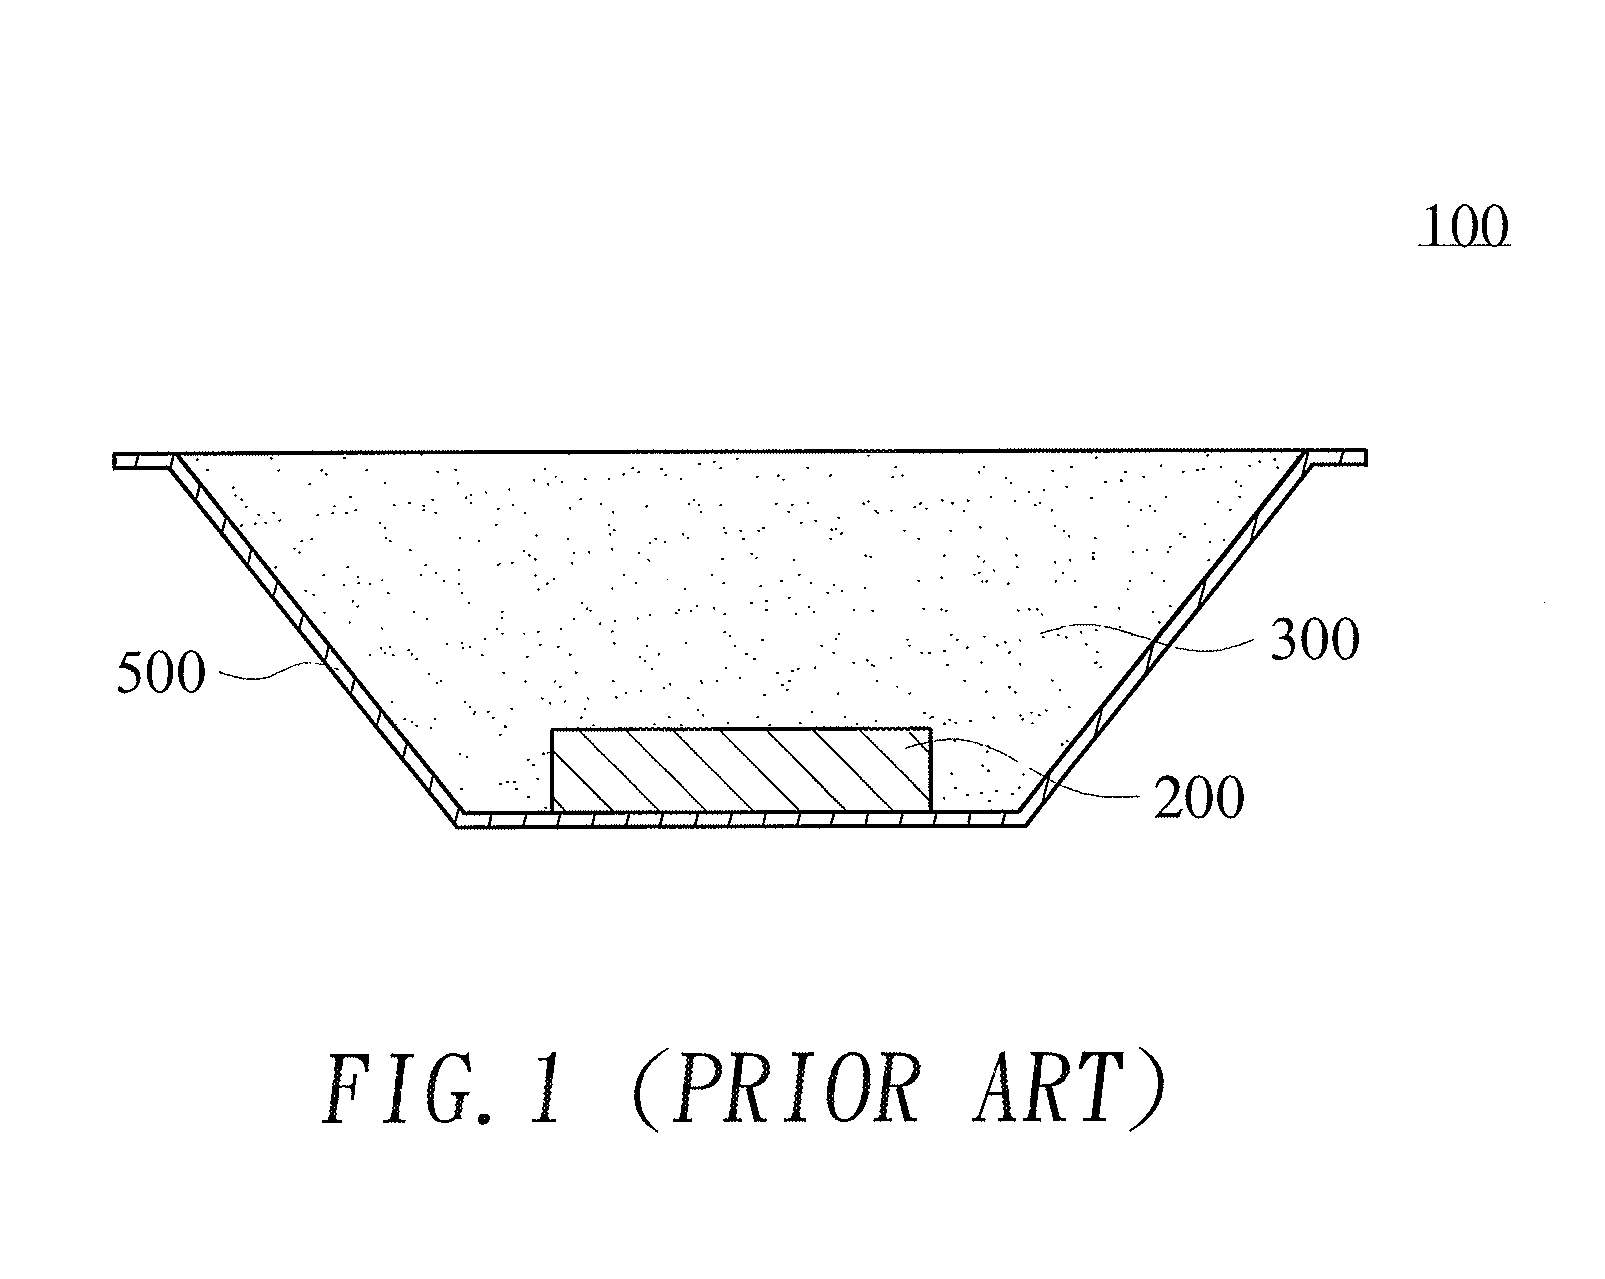 Light-emitting diode packaging structure of low angular correlated color temperature deviation